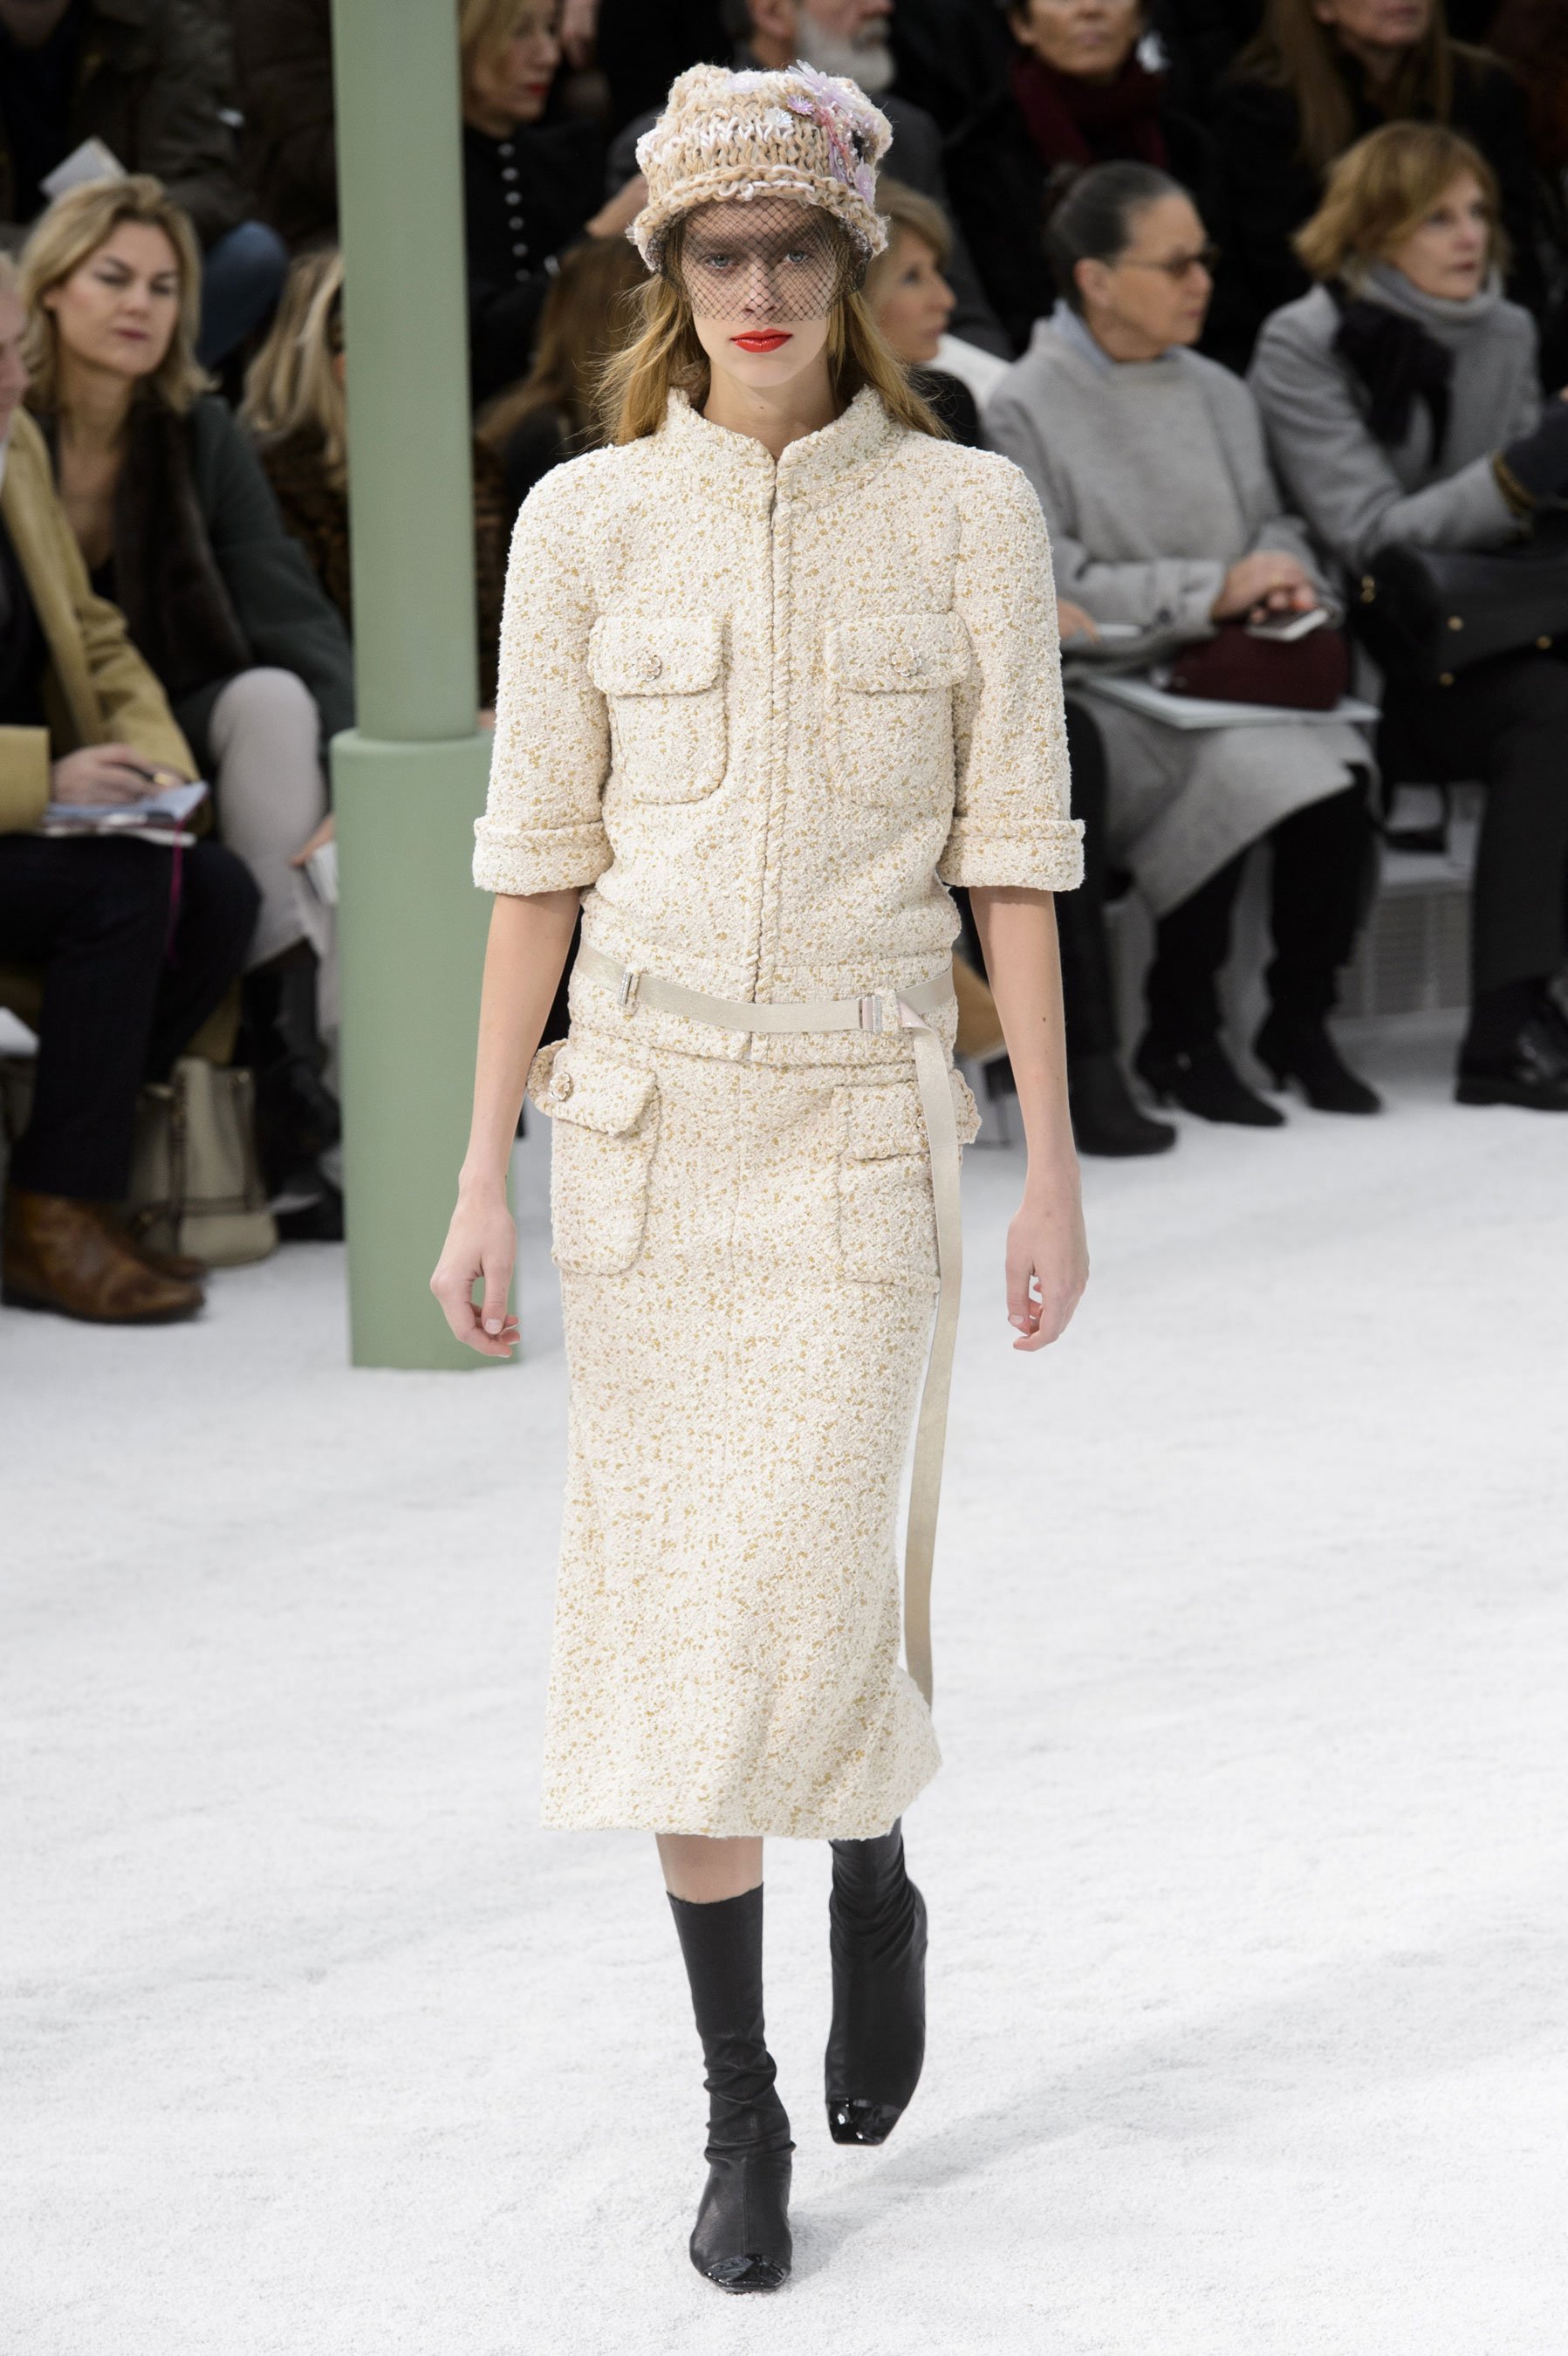 chanel haute couture spring 2015 pfw 22 lexi